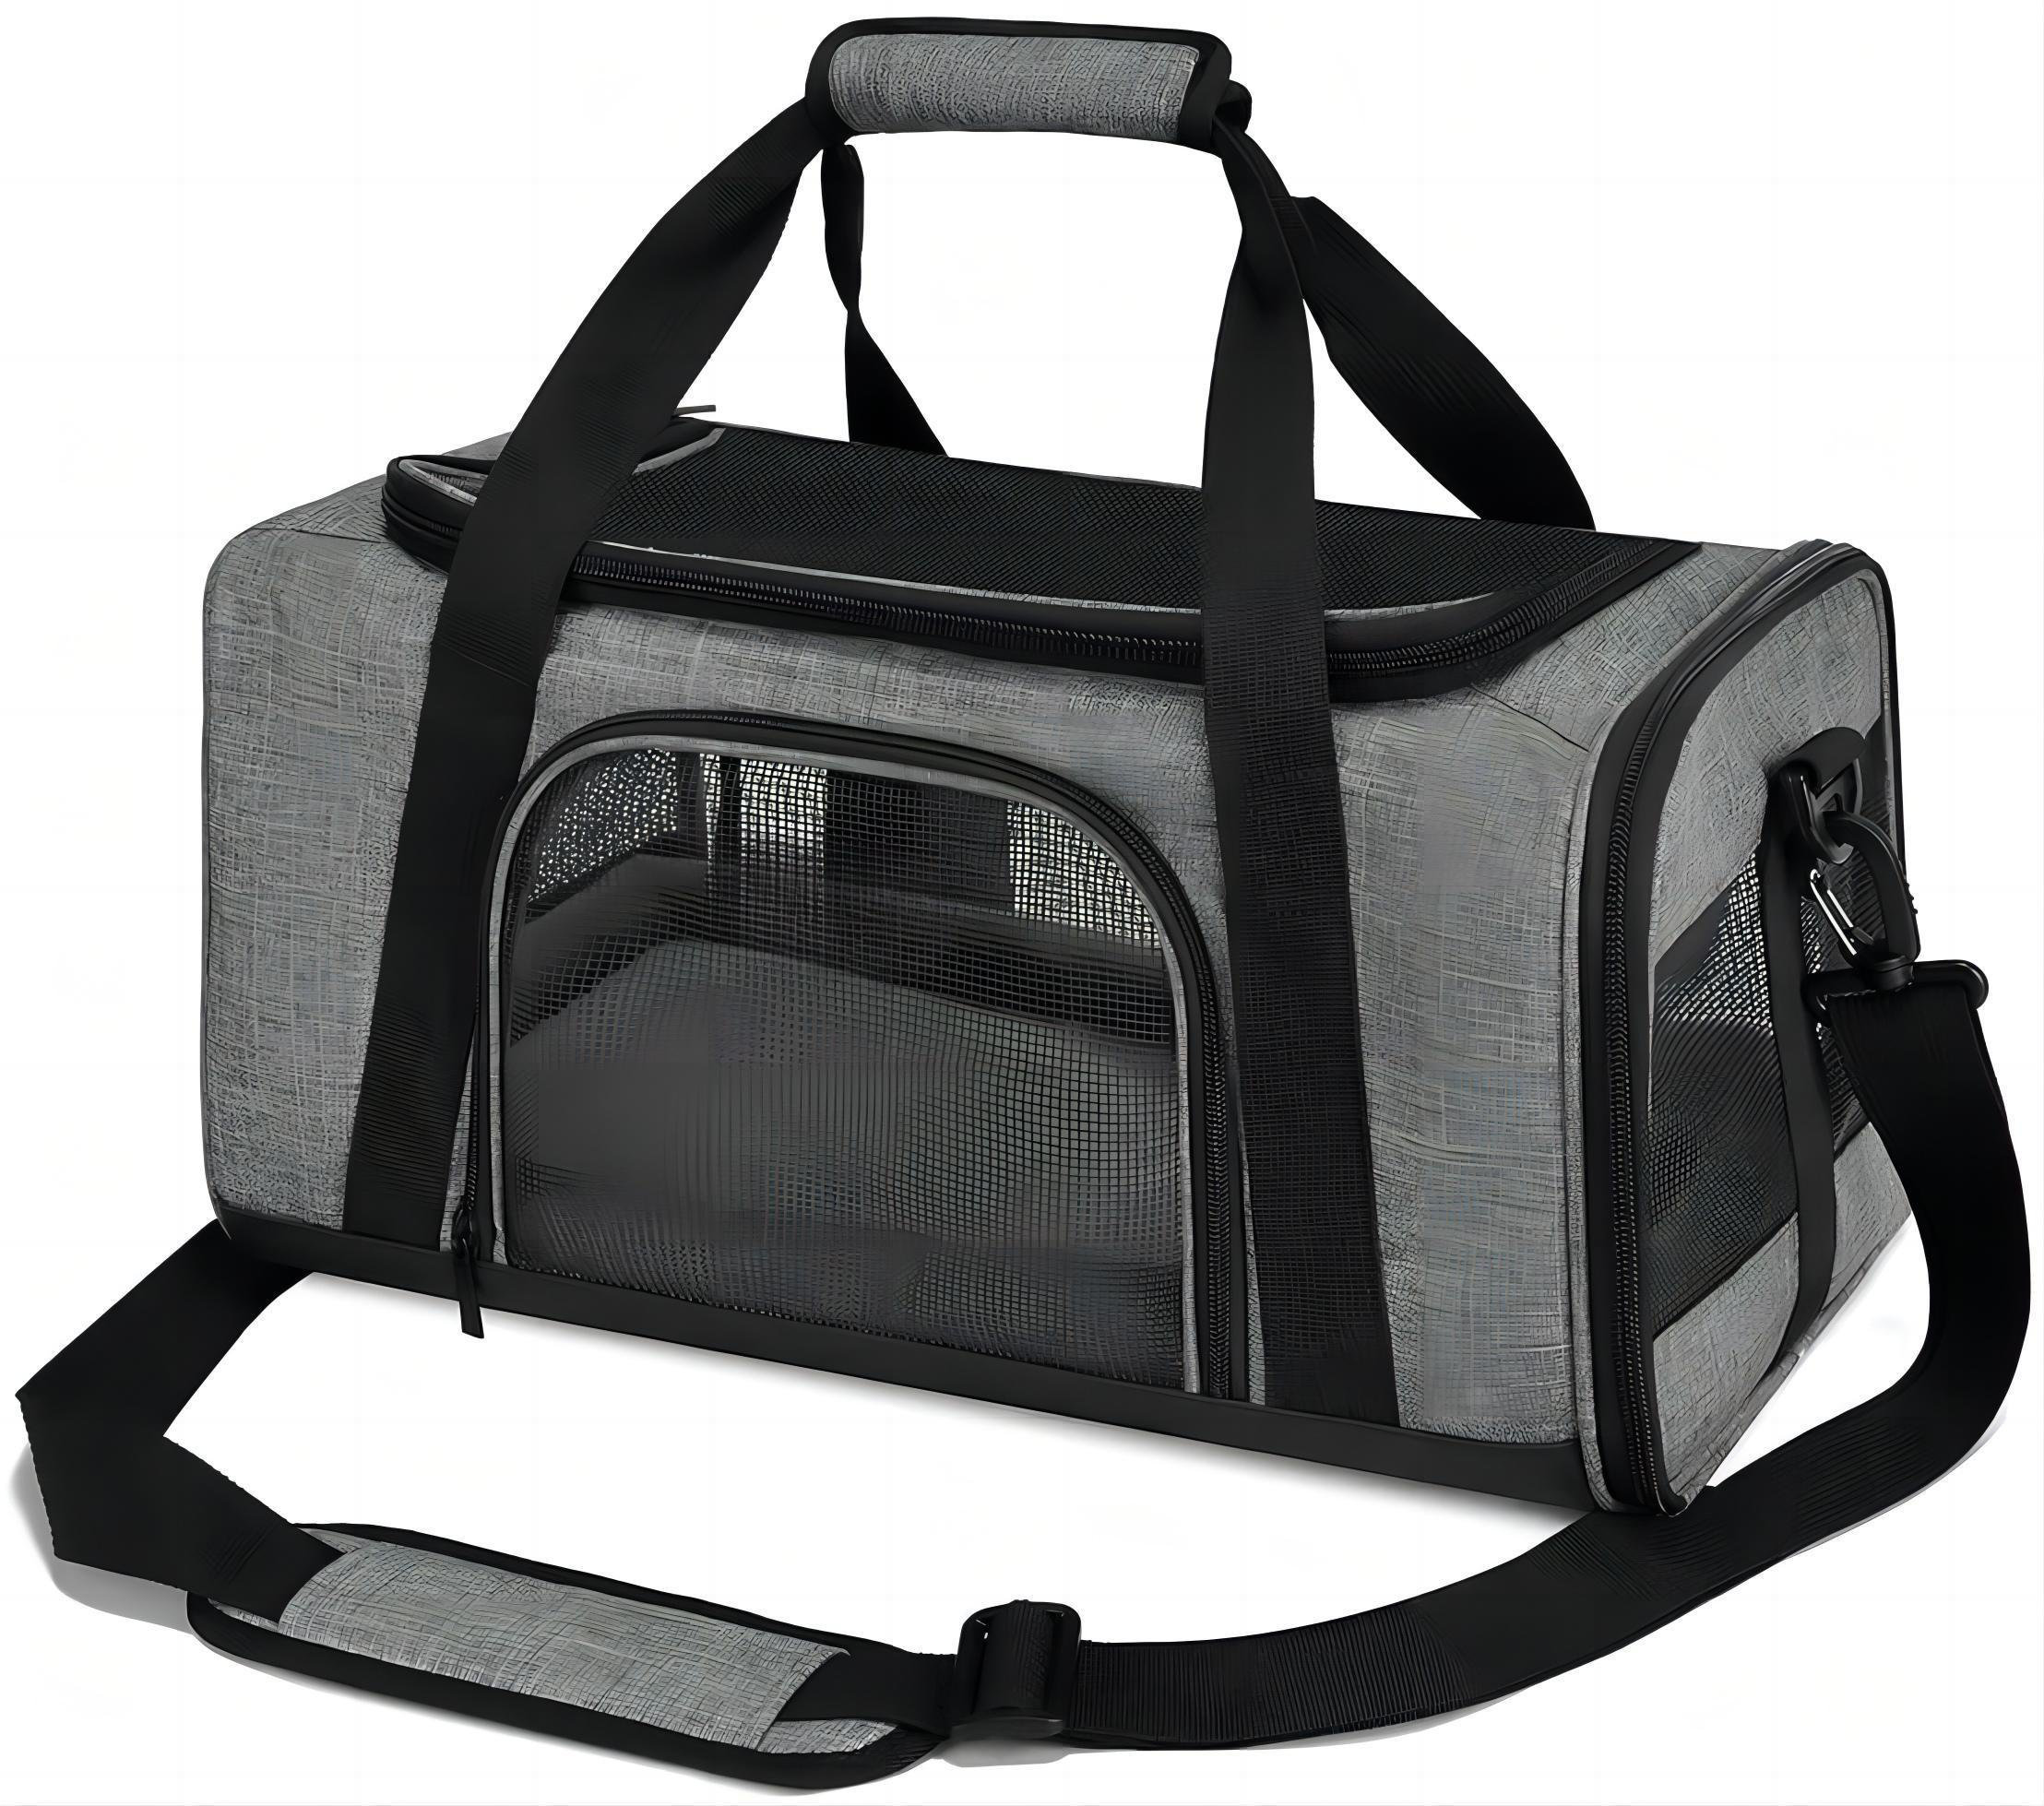 Cat Carriers for Large Cats Up to 20 lbs, Pet Cat Carrier with A Bowl Airline Approved Collapsible Soft-Sided Cat Carrier for Small Medium Cats Dogs